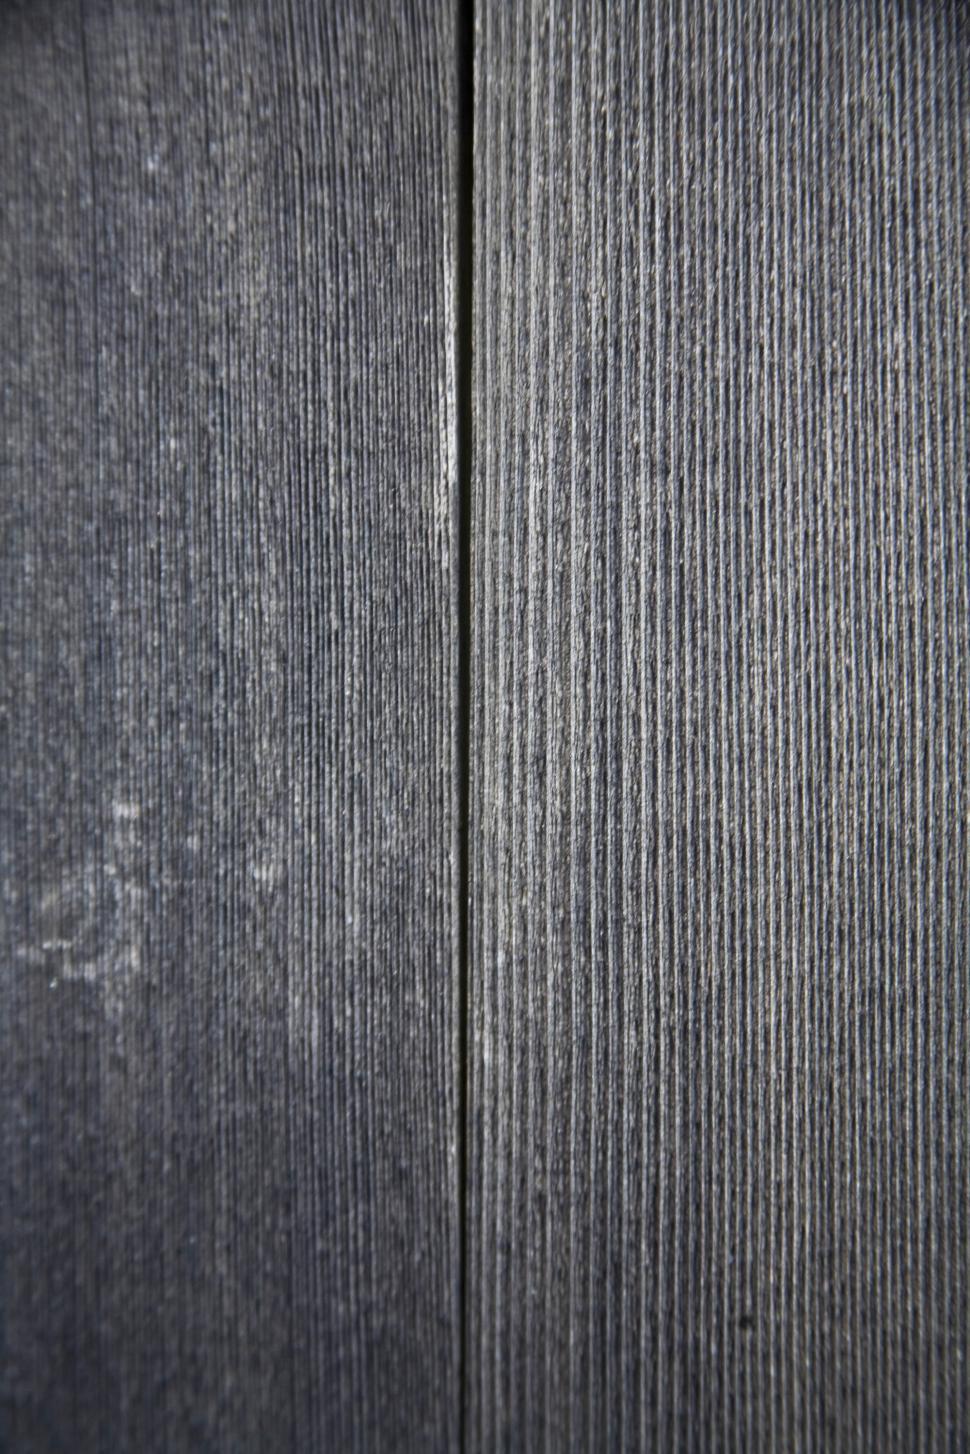 Free Image of wooden plank 